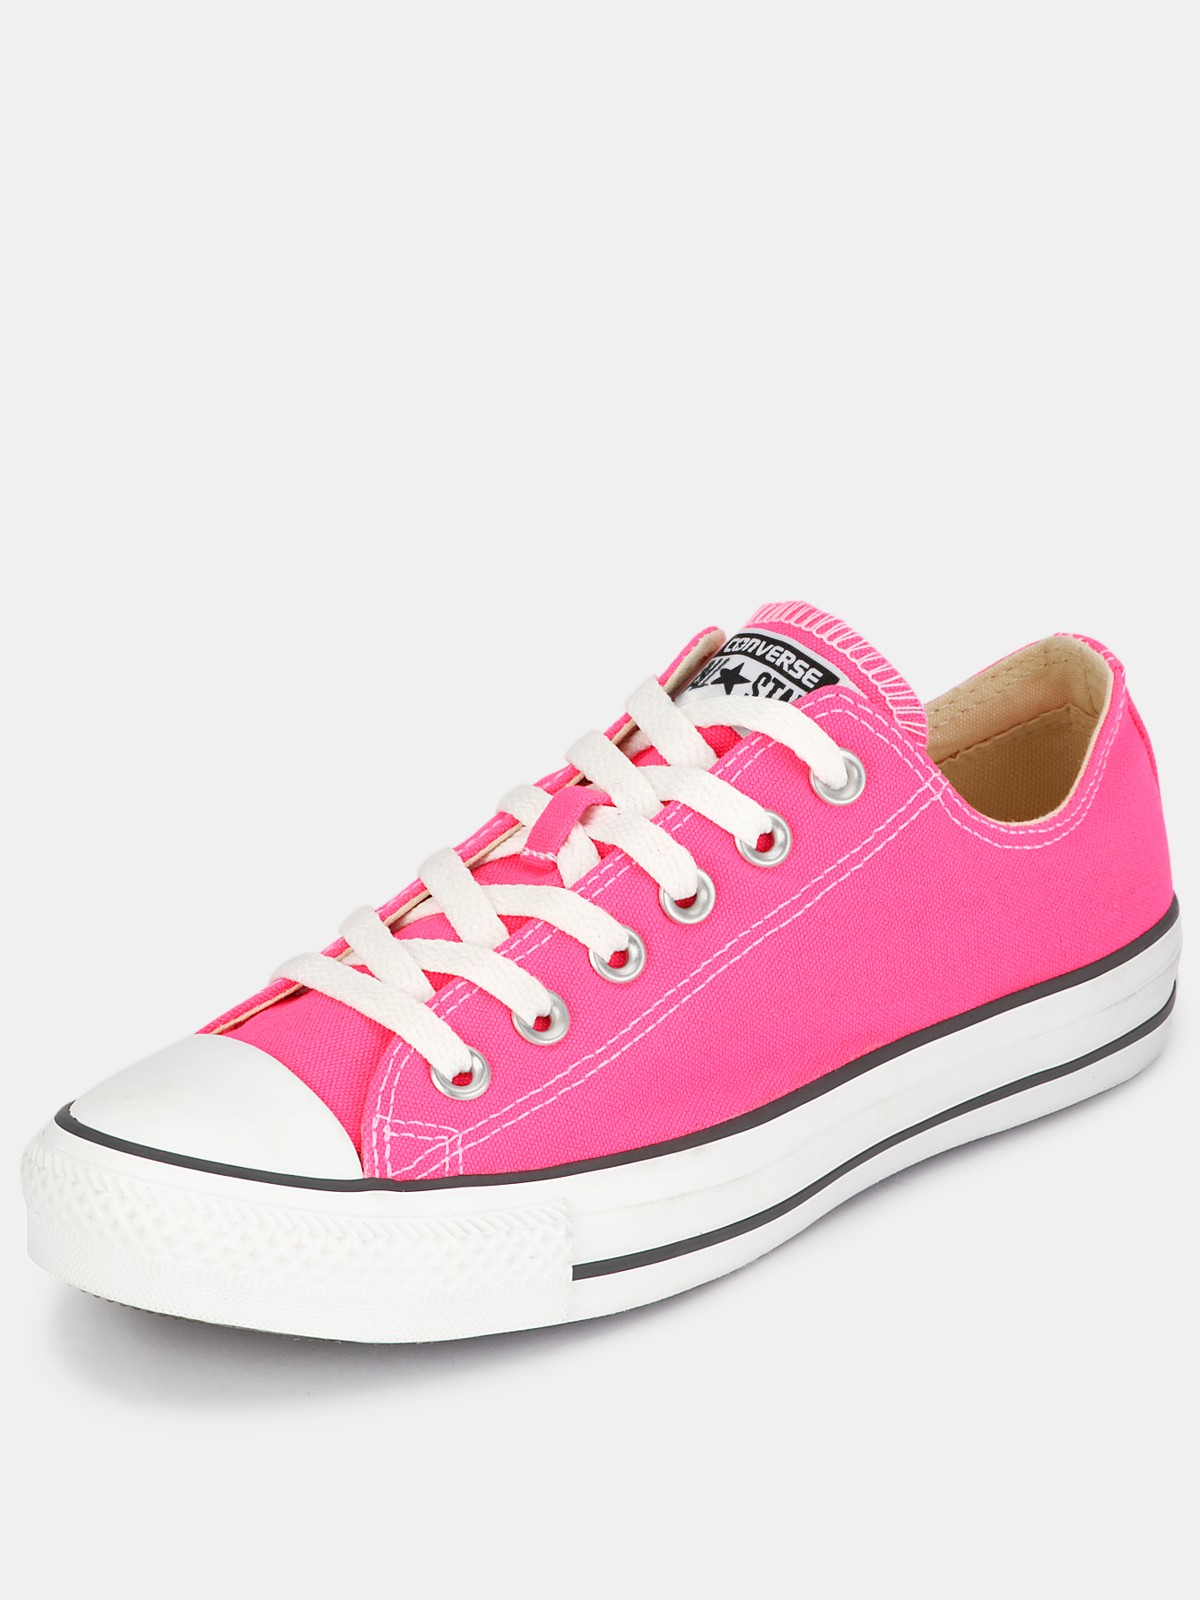 Converse Chuck Taylor All Star Ox Seasonals In Pink Neonpink Lyst